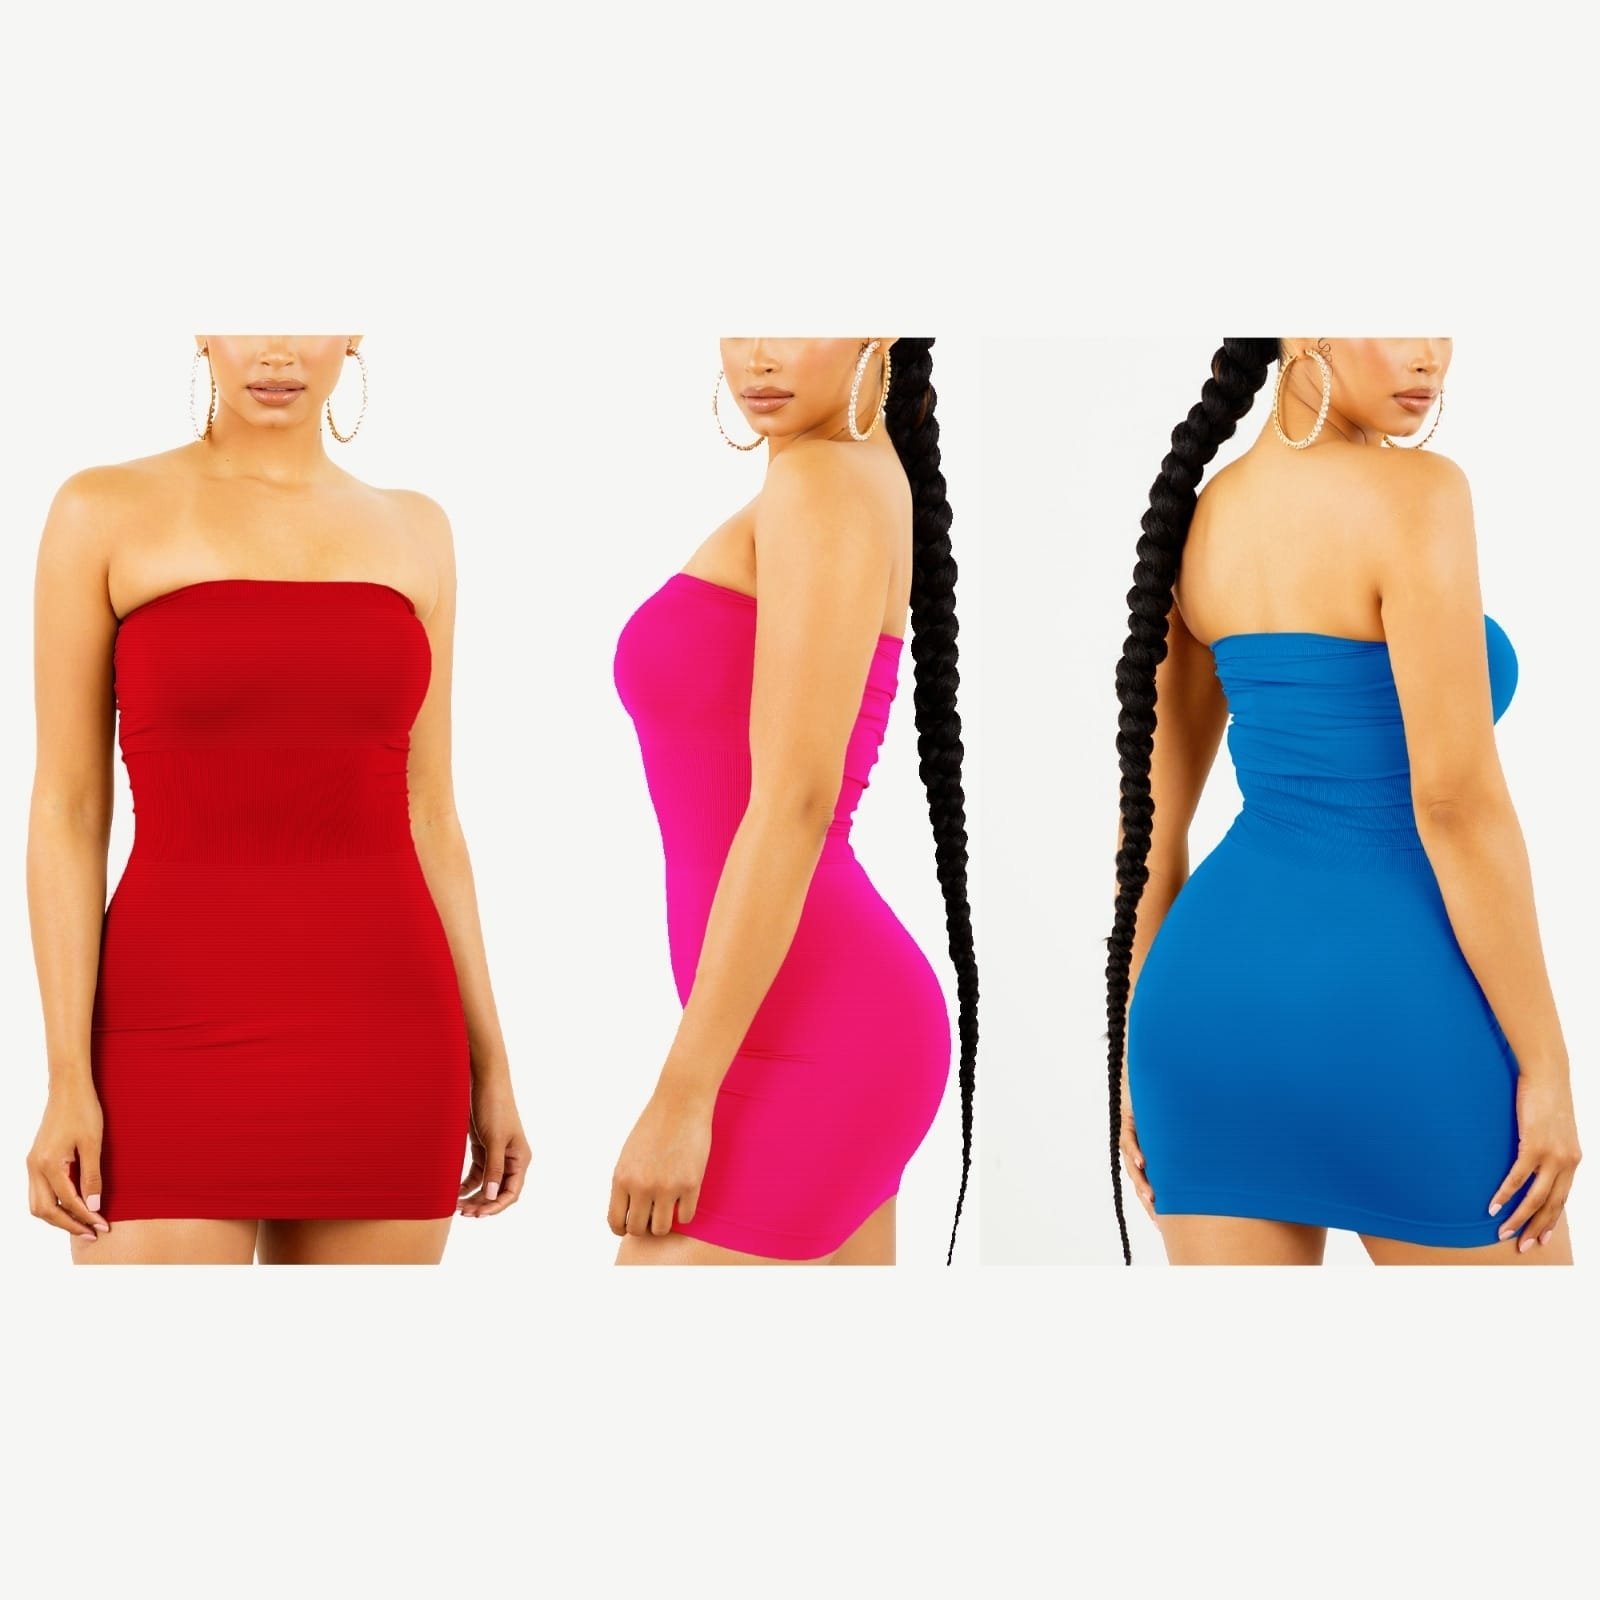 3-Pack Women's Strapless Stretchy Seamless Tight Fit Body Con Mini Tube Top Dress - RED, 1XL